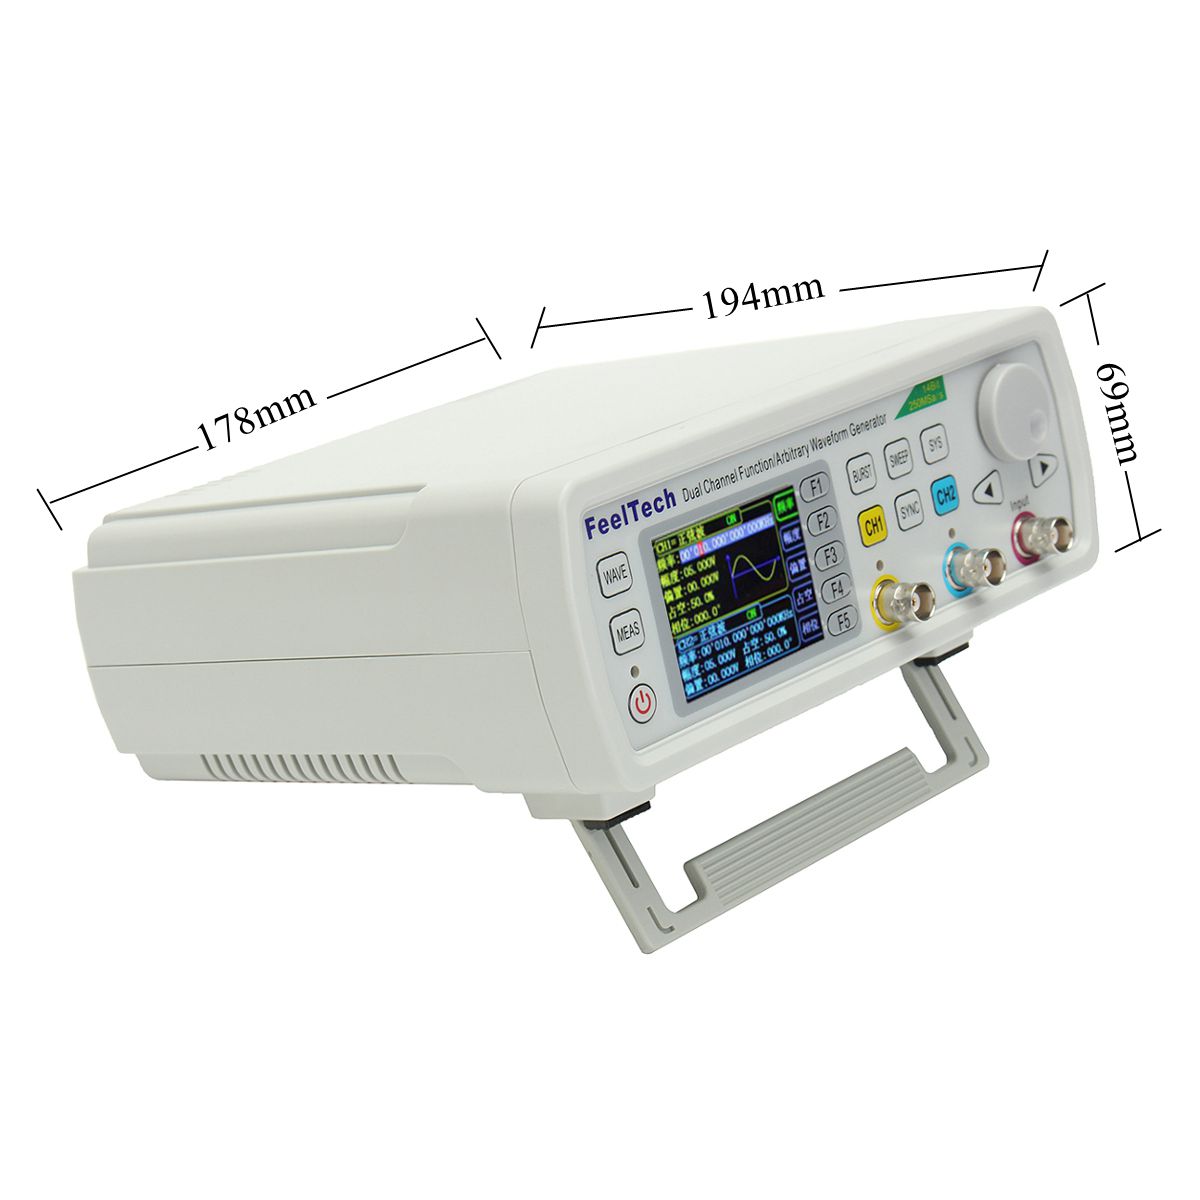 FY6600 Digital 12-60MHz Dual Channel DDS Function Arbitrary Waveform Signal Generator Frequency Meter 94